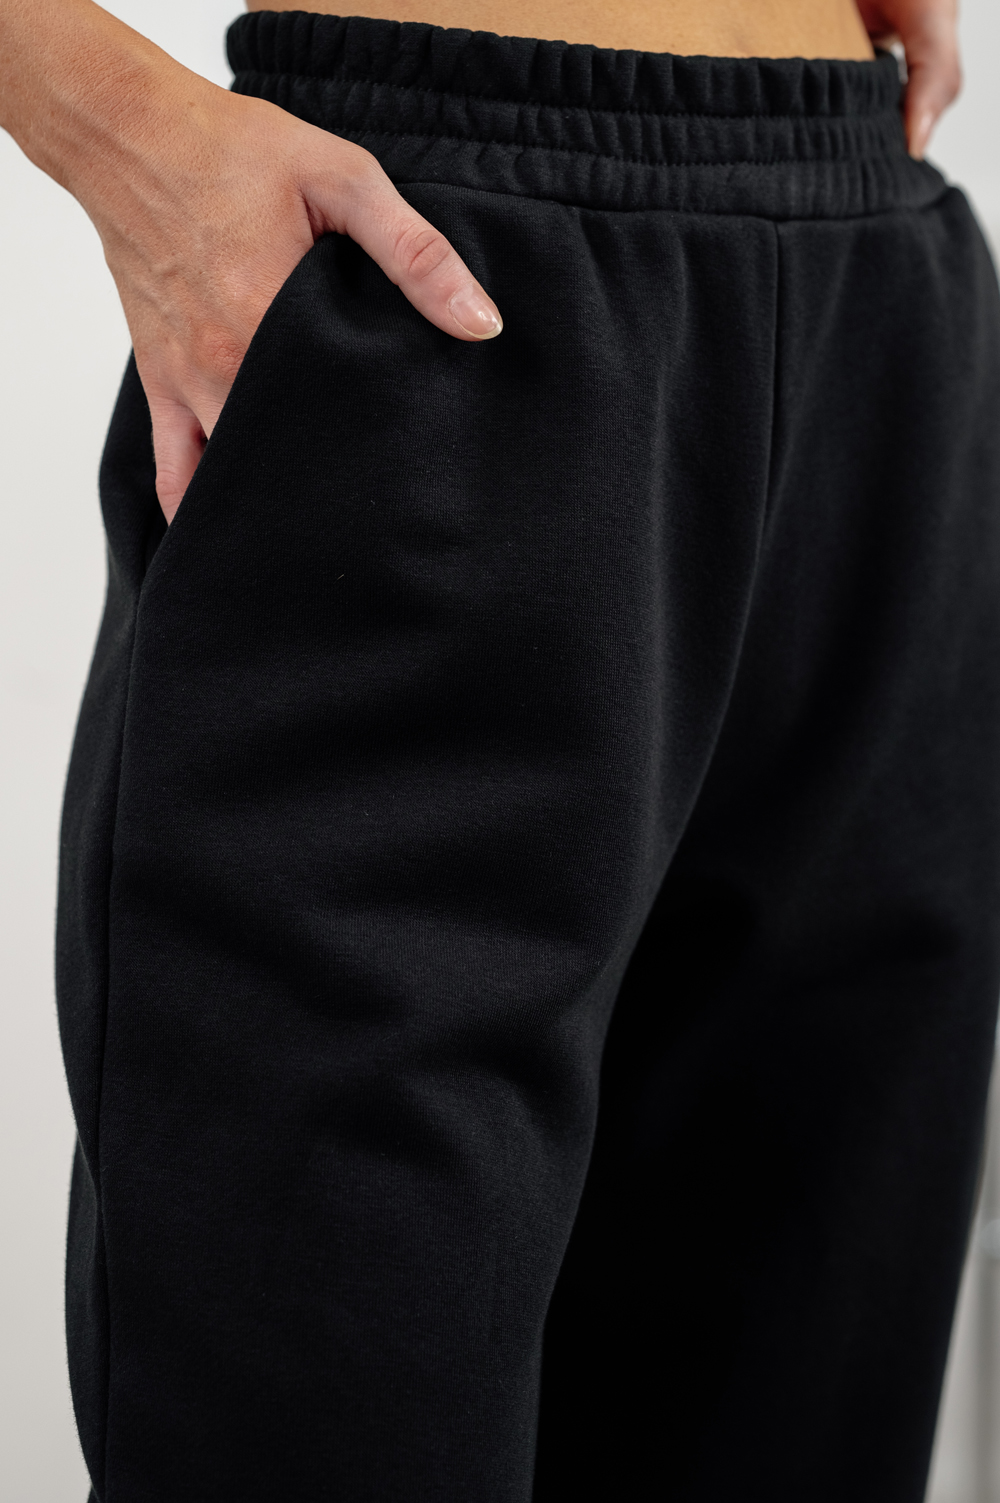 Black sweatpants with a loose fit